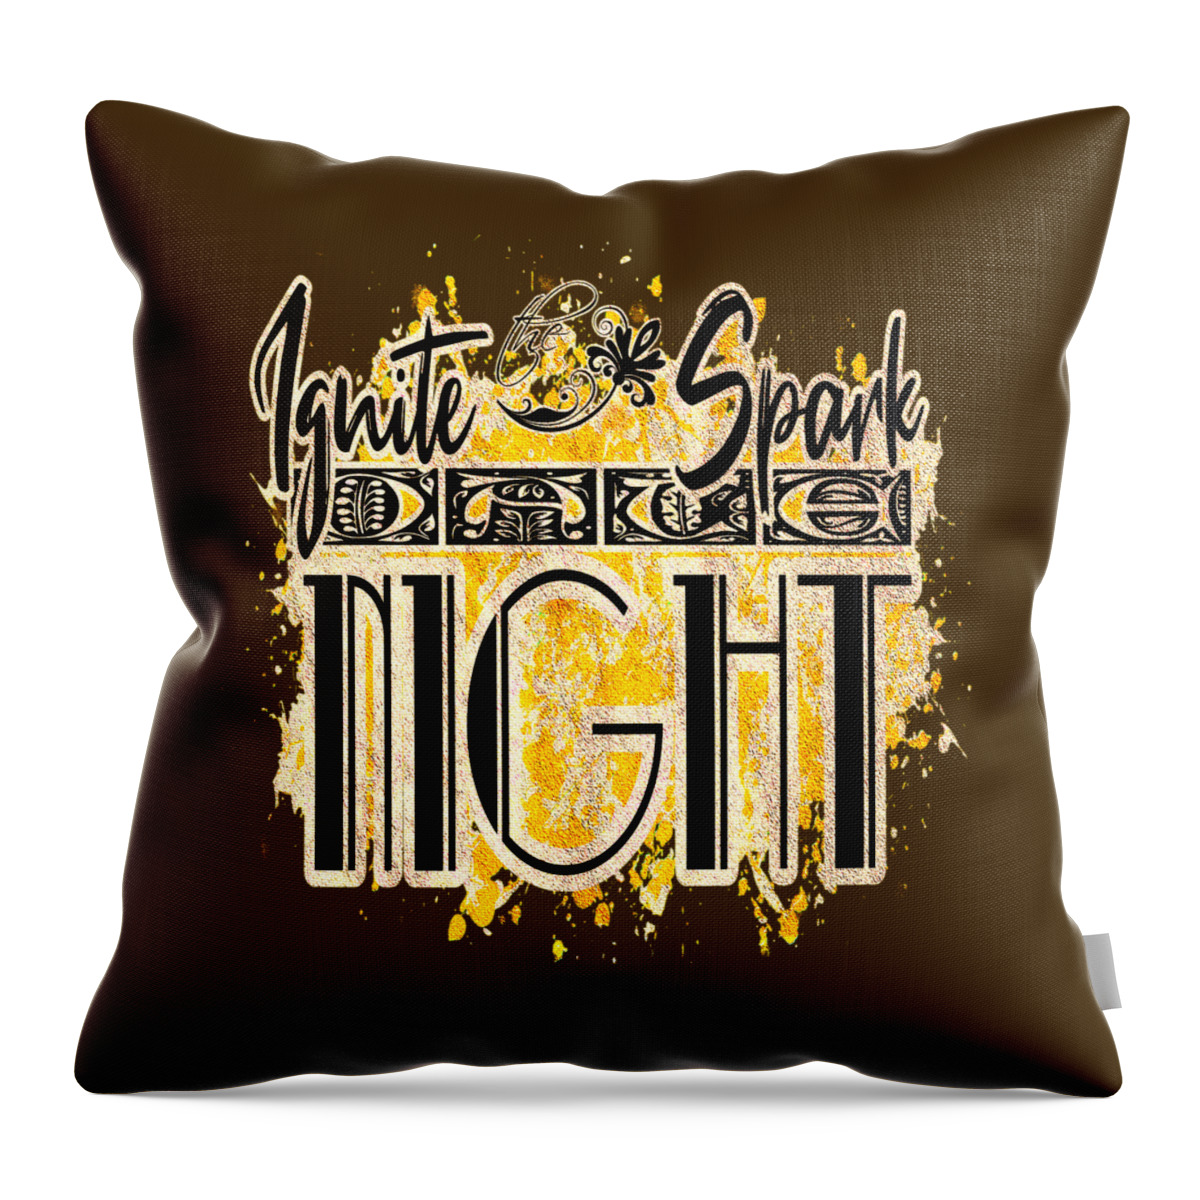 Ignite Throw Pillow featuring the digital art Ignite the Spark it's Date Night by Delynn Addams